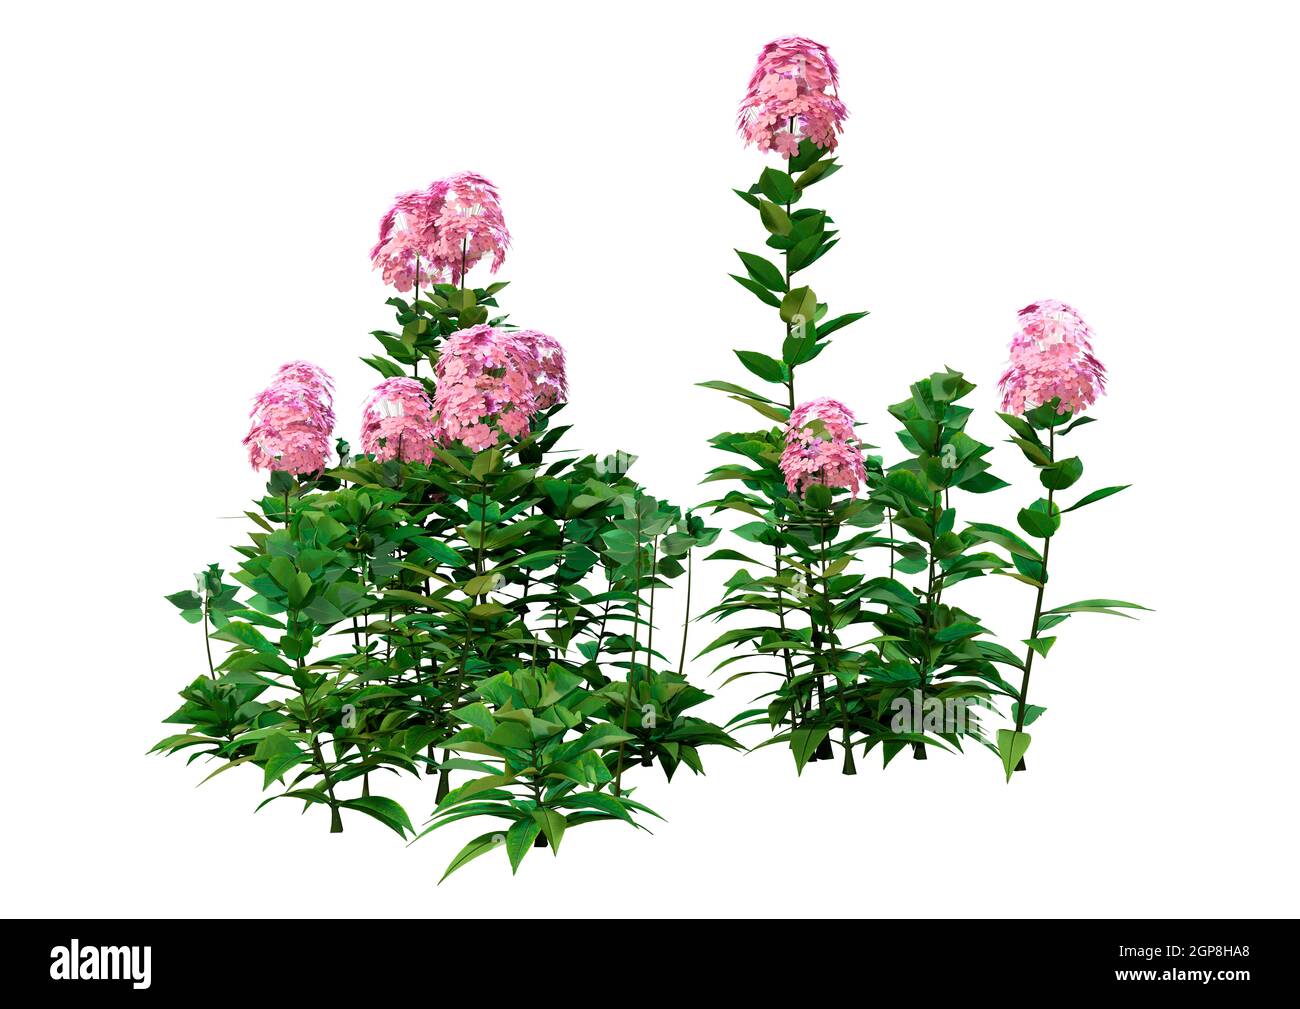 3D rendering of border Phlox or Phlox paniculata flowers isolated on white background Stock Photo